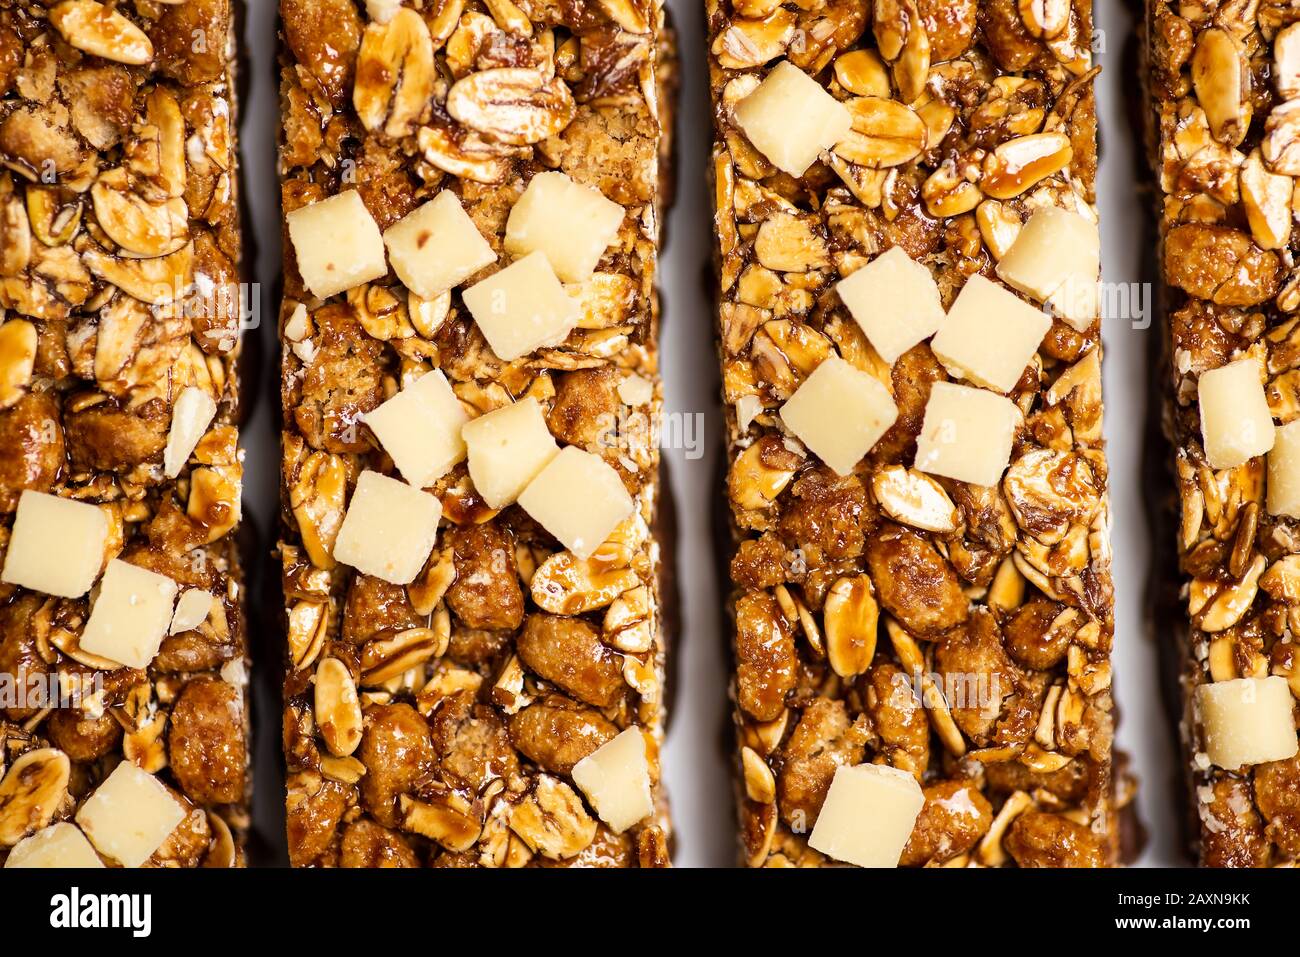 Protein granola bars with nutson a table Stock Photo